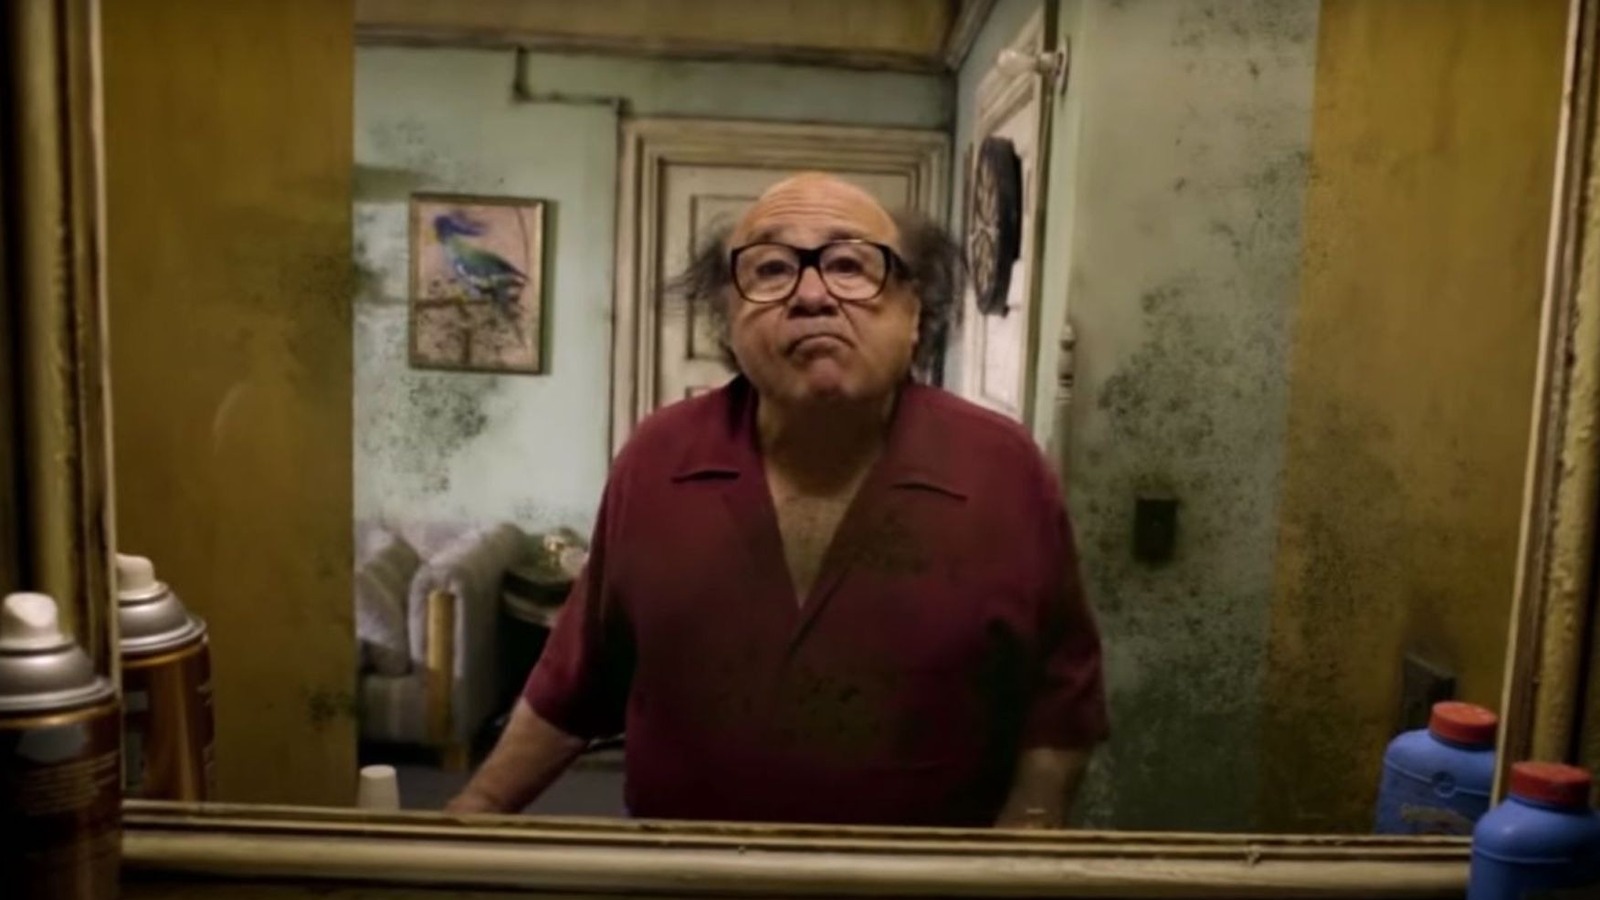 Let's give it up for the real star of this movie: Danny DeVito's Rain Jacket  & Hat : r/thehauntedmansion